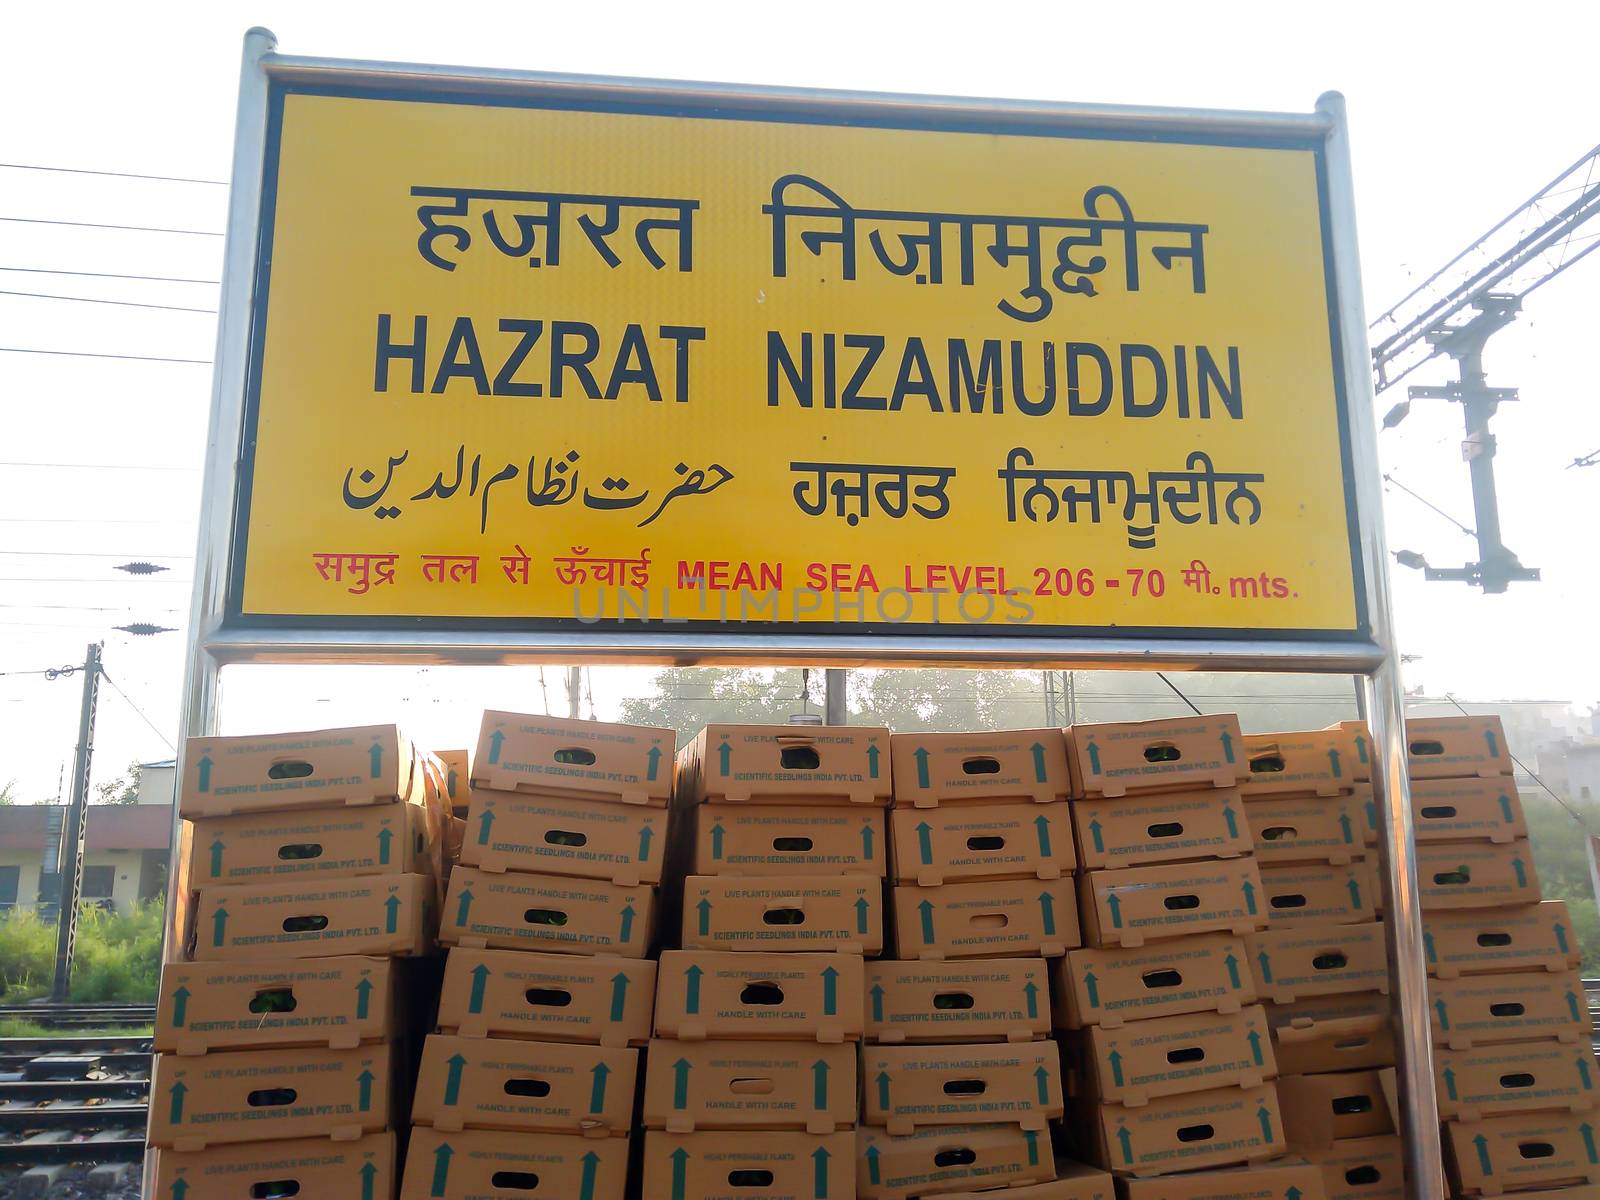 Hazrat Nizamuddin railway station in South Delhi Division of the Northern Railway zone of the Indian Railways was upgraded to help relieve congestion at New Delhi Railway Station. India August 2019